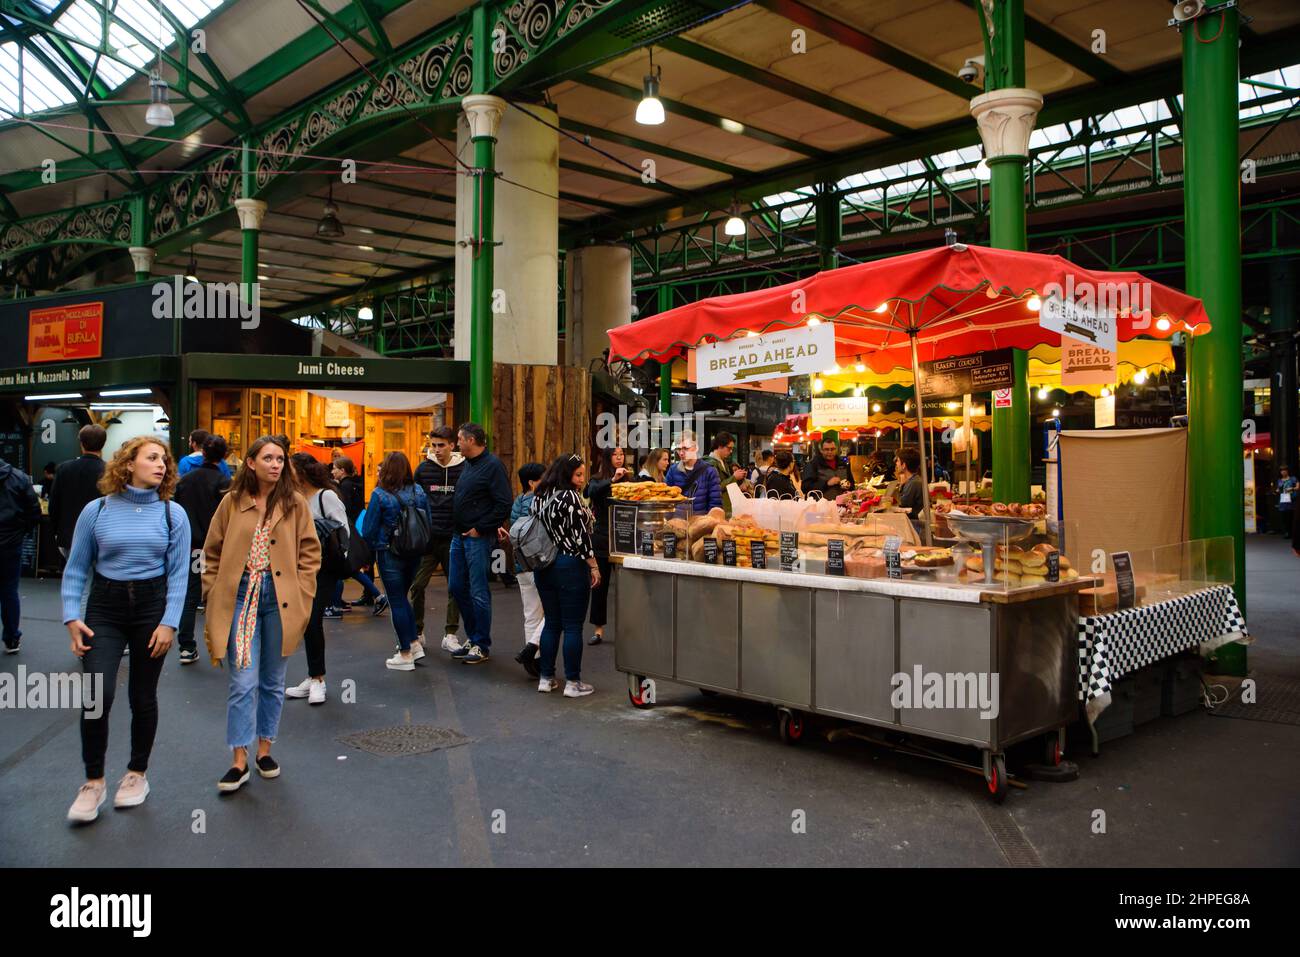 Borough Market, one of the oldest food markets in London, England Stock Photo